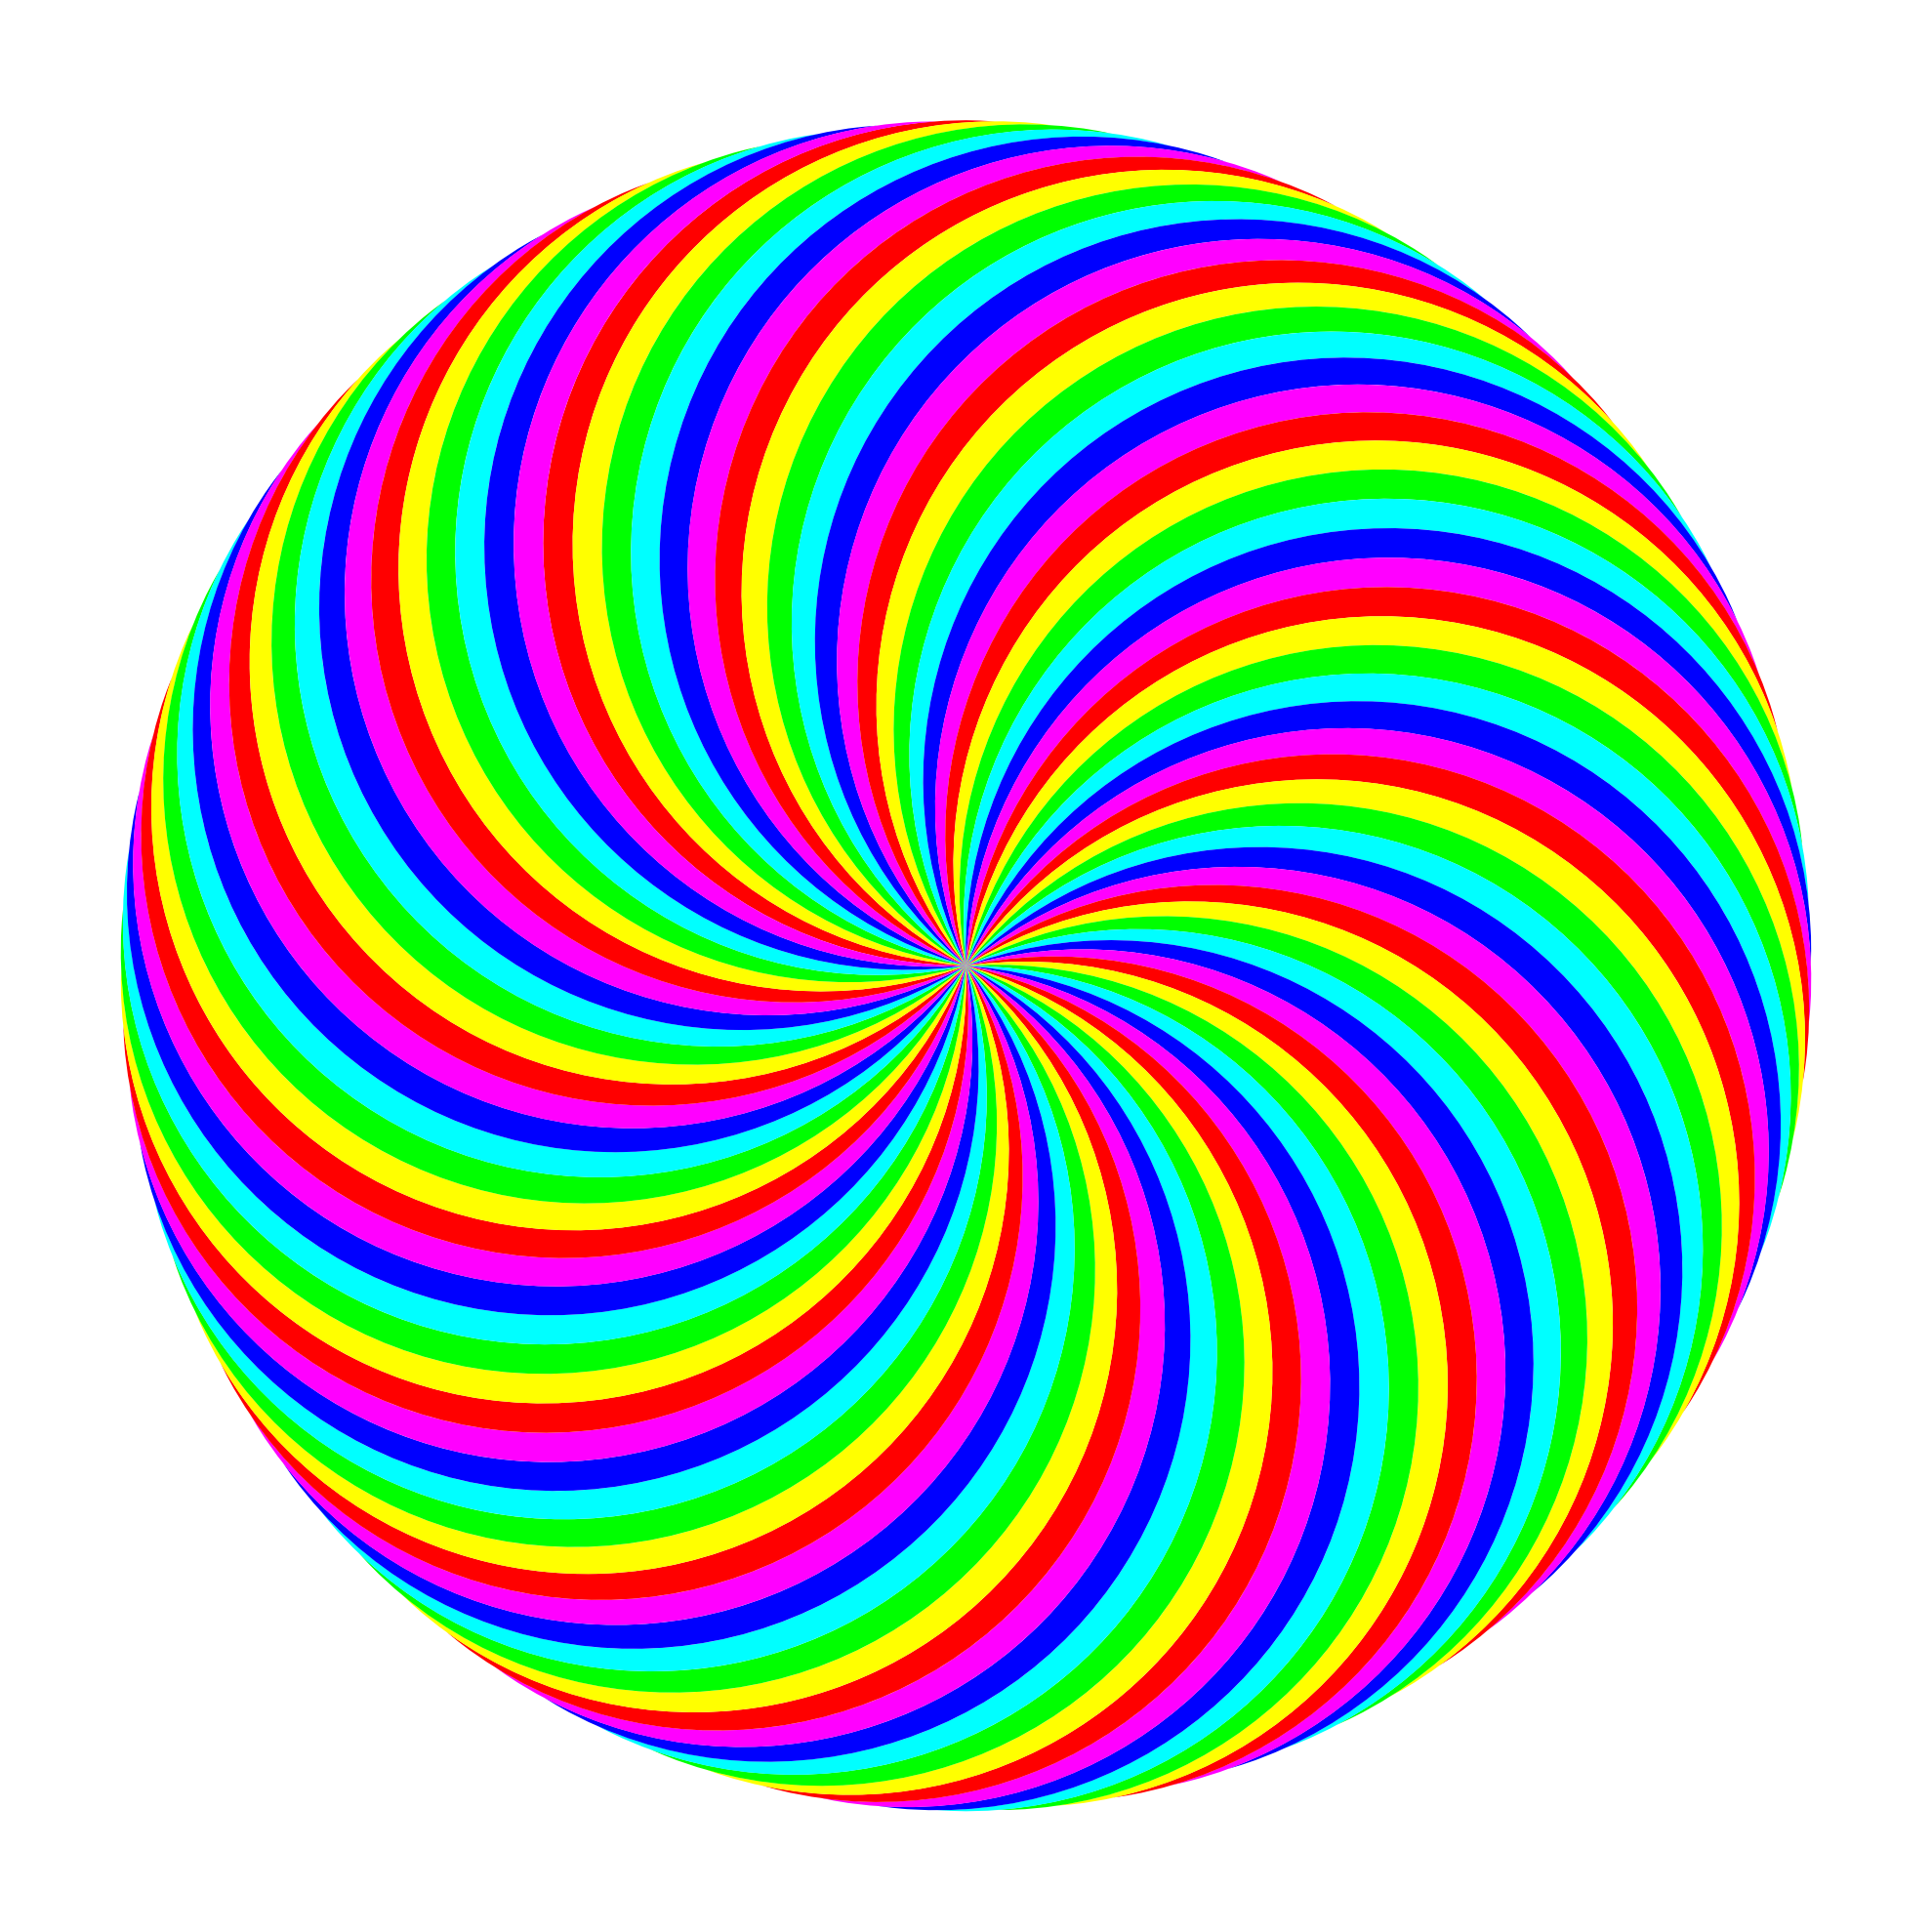 Colored Swirls. 90 Circle Swirl 6 Color By 10binary On DeviantArt 